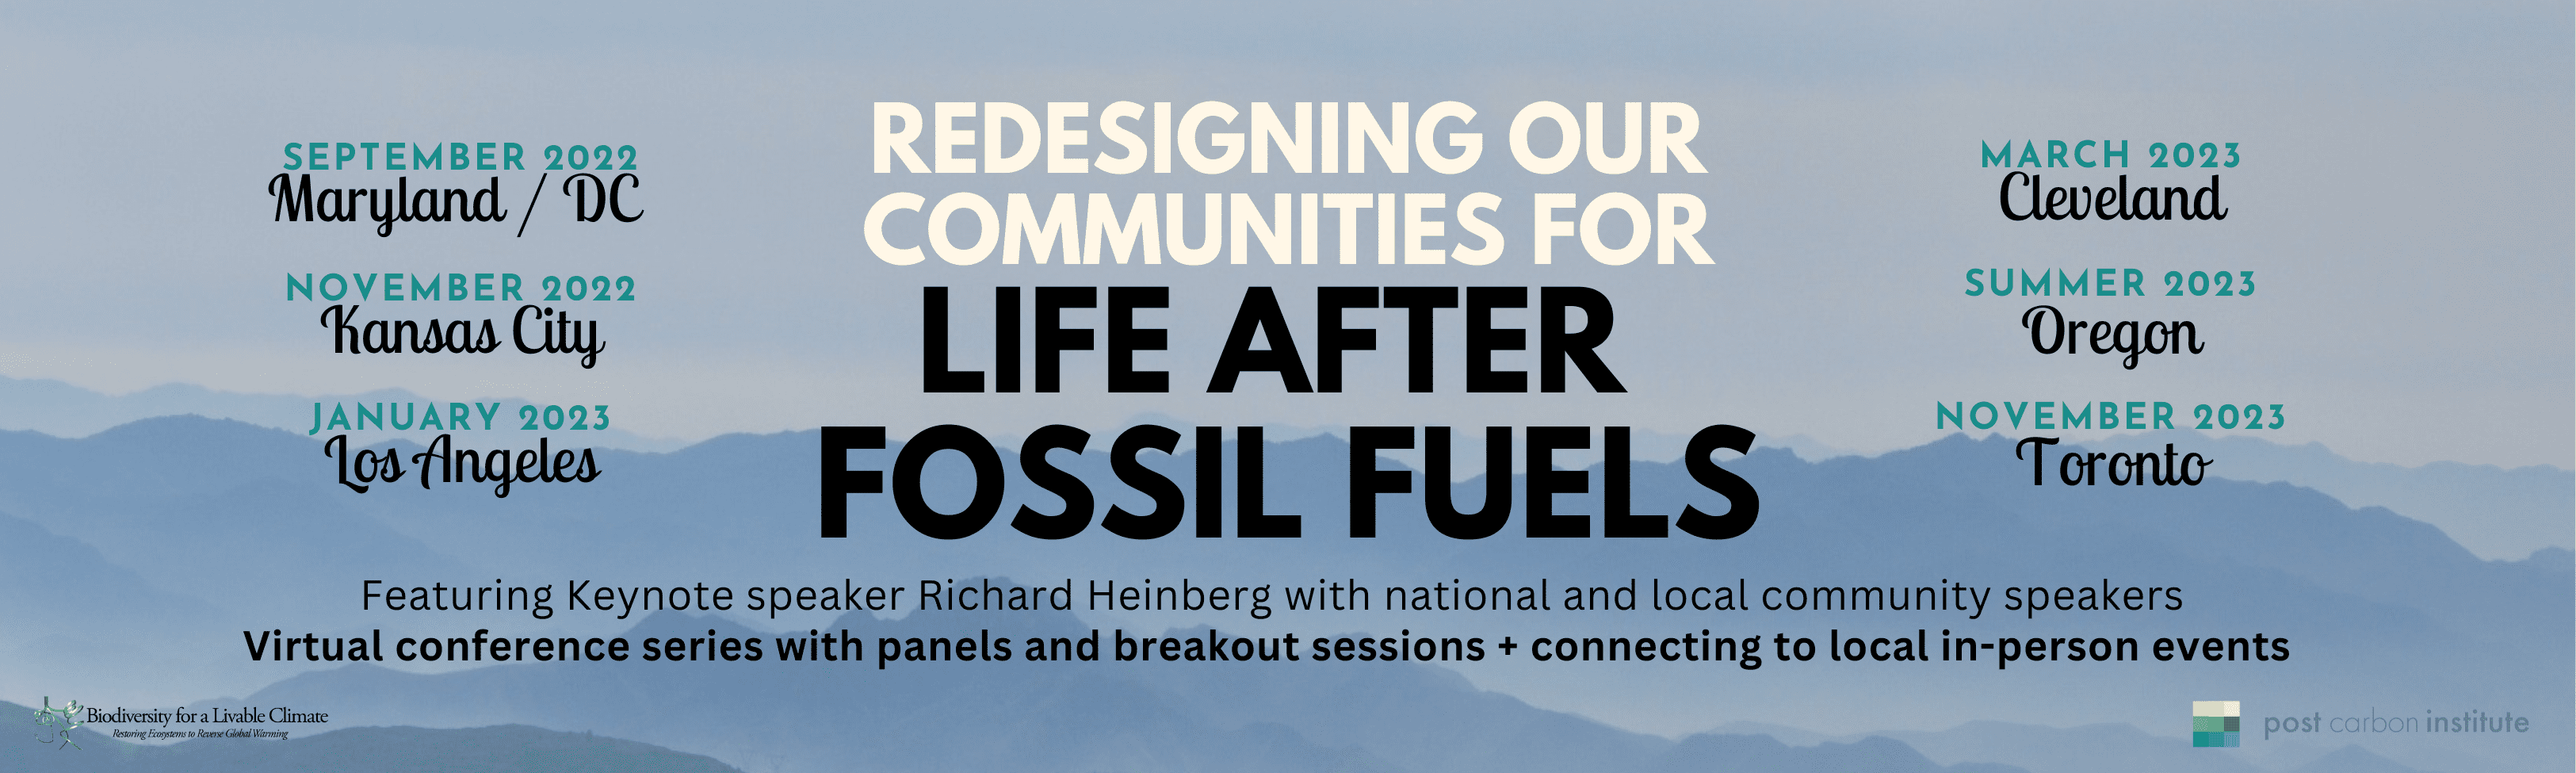 Redesigning Our Communities for Life After Fossil Fuels